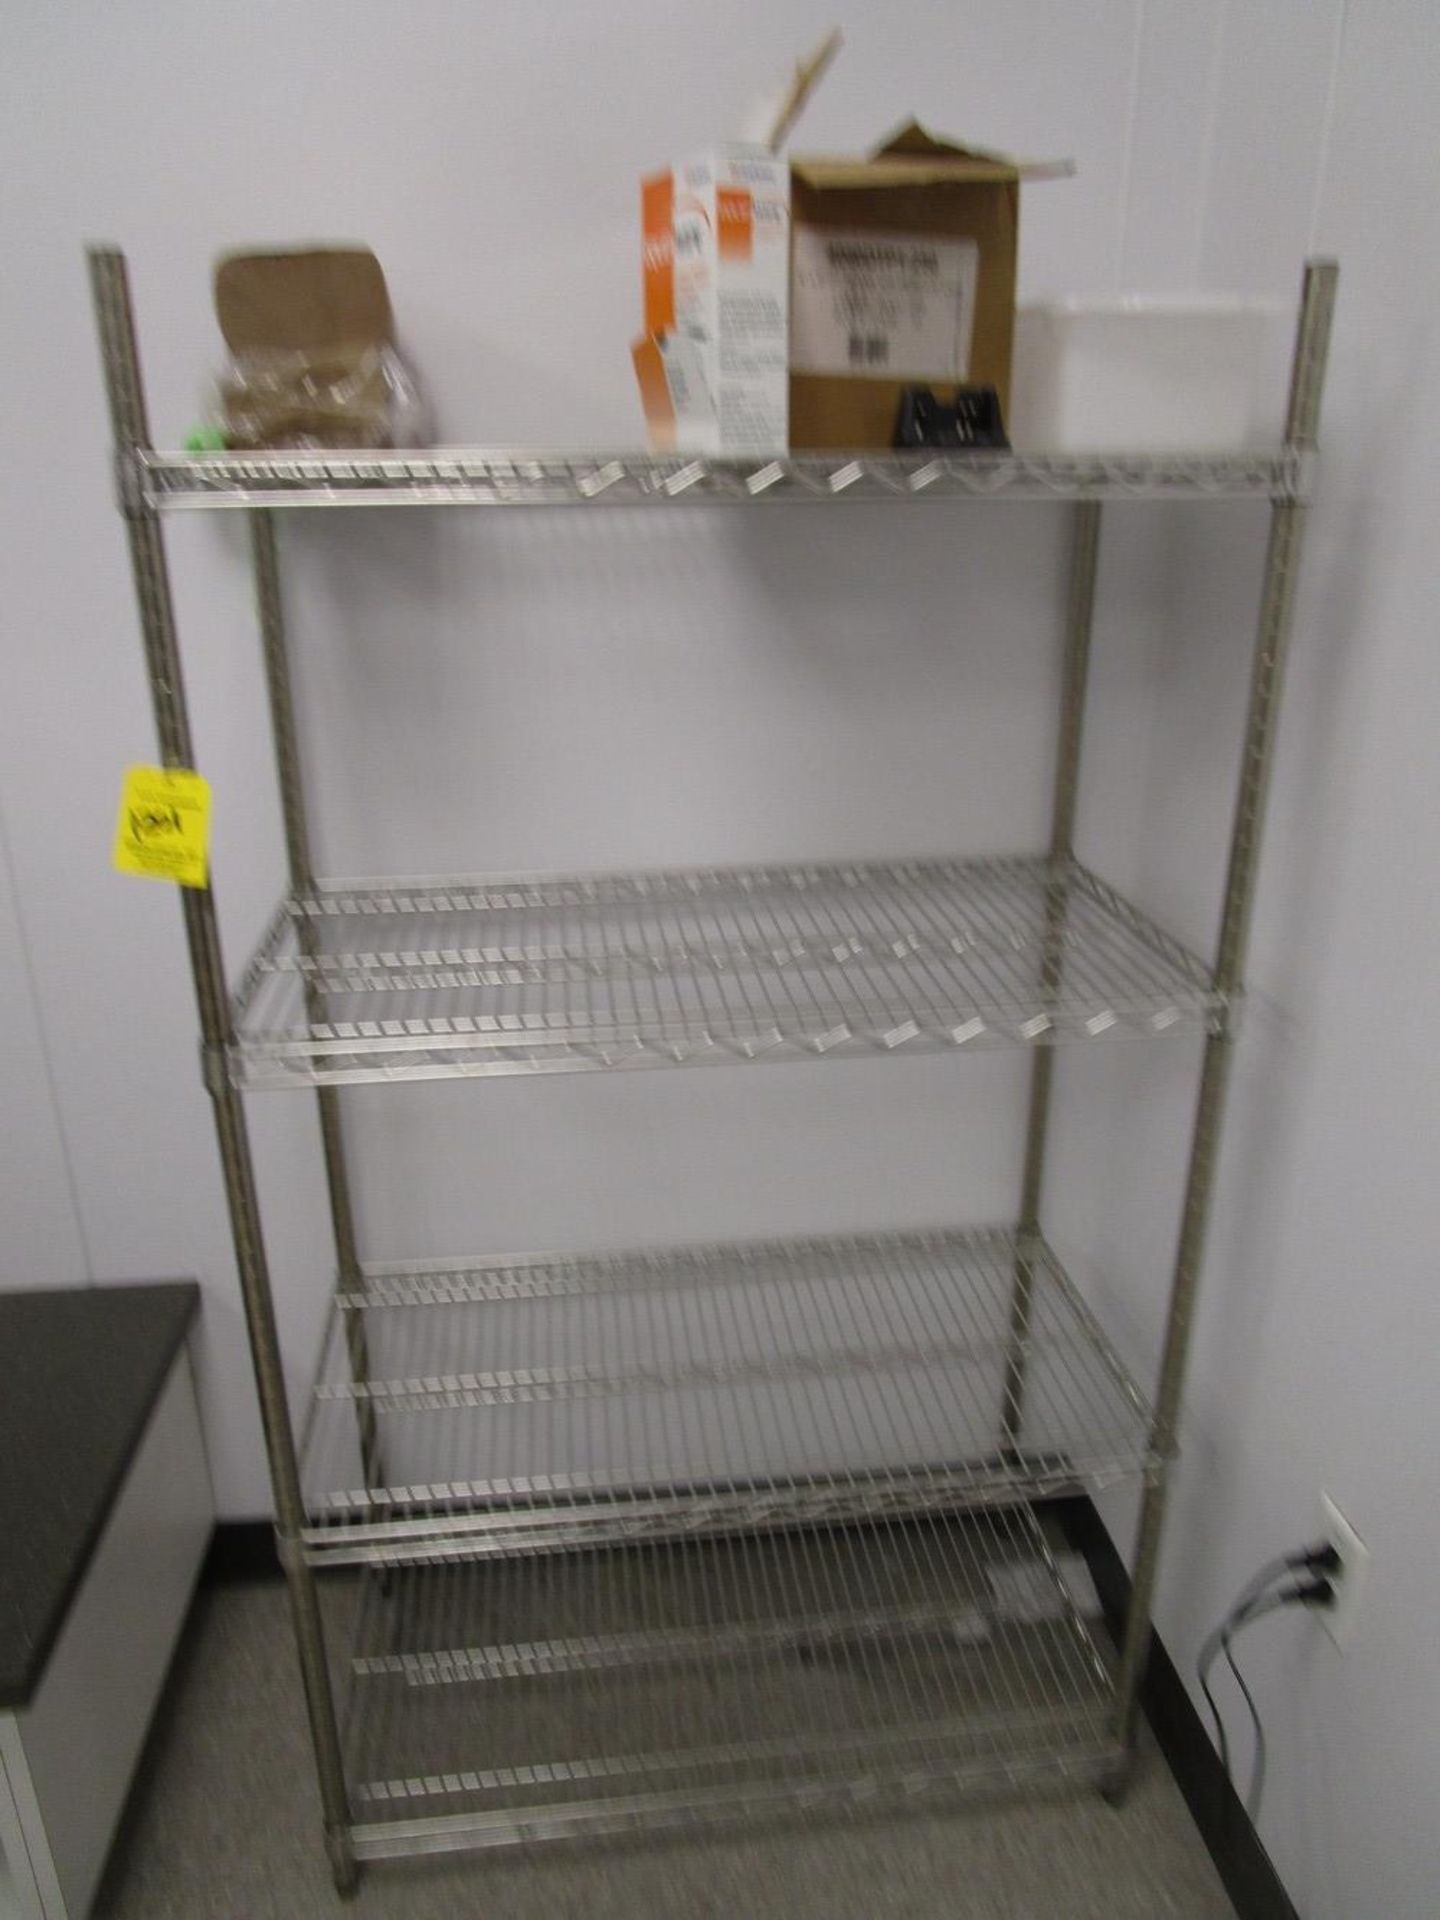 Uline Wire Shelving Unit | Rig Fee: No Charge